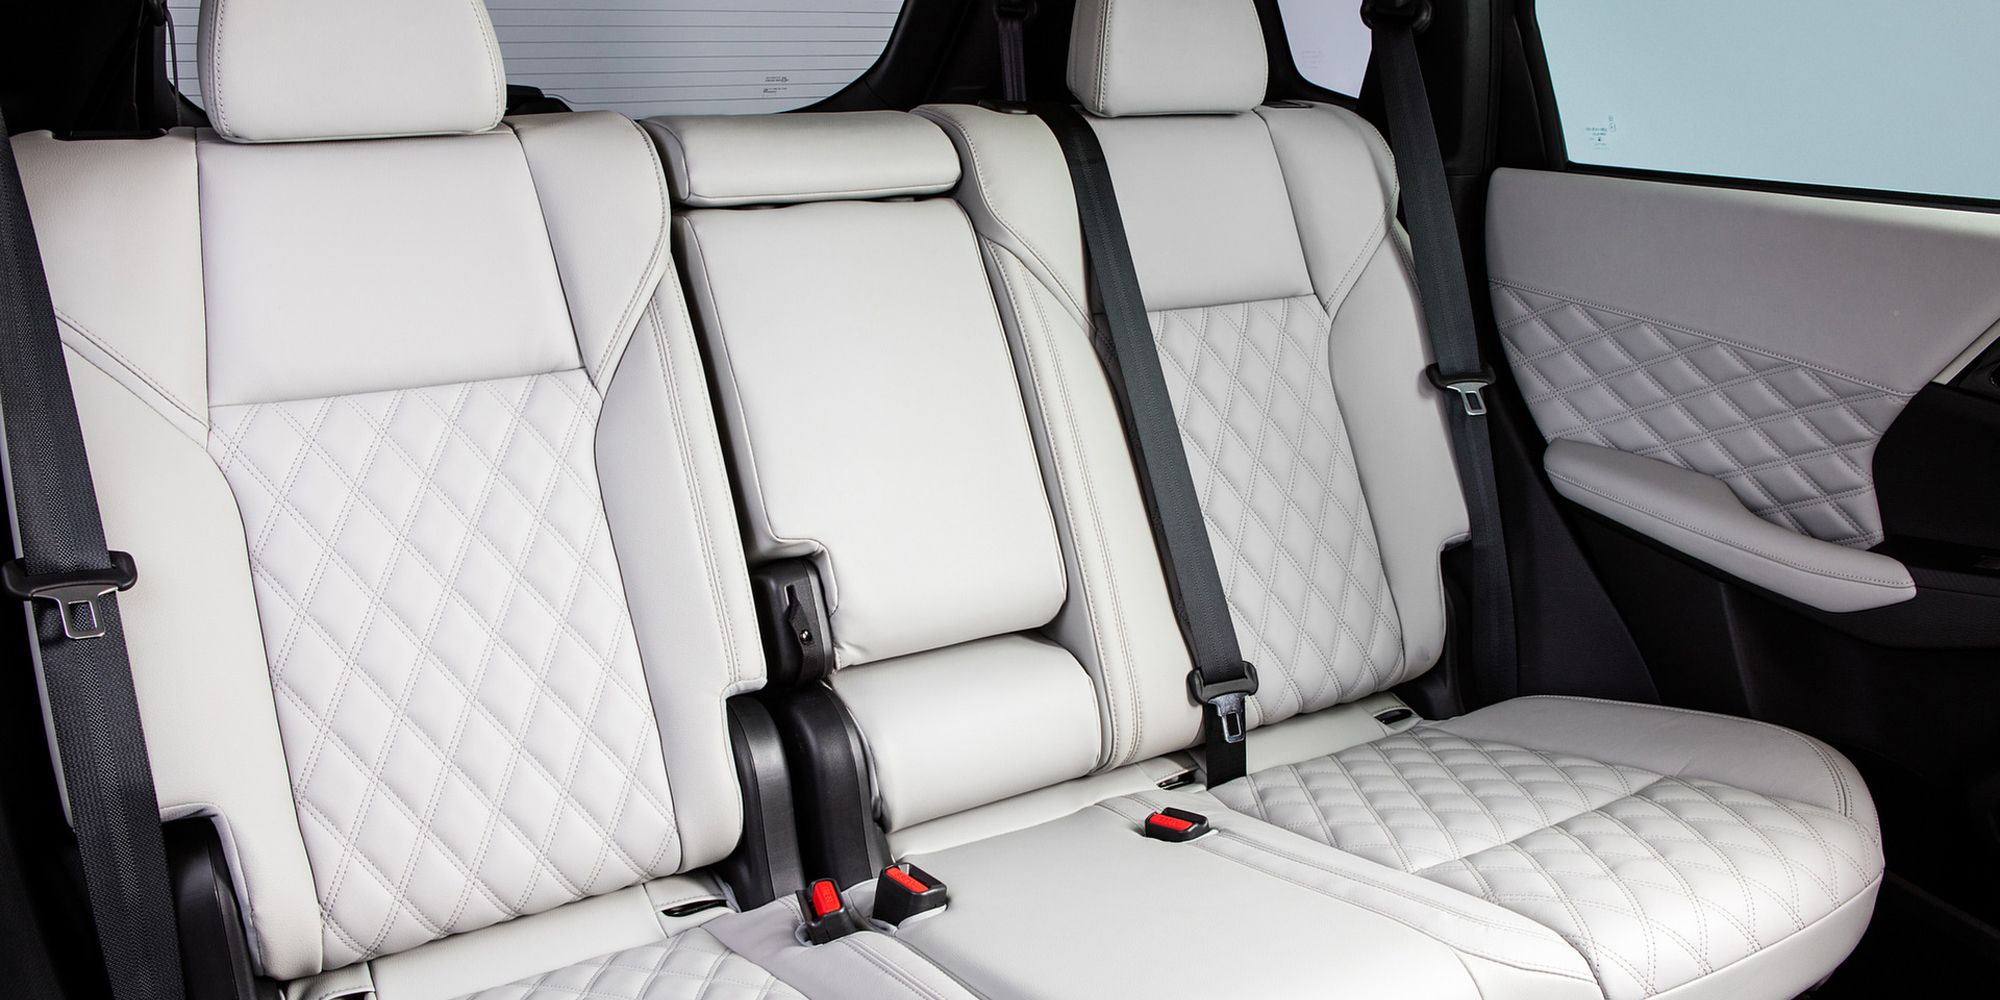 The second row seats in the new Outlander